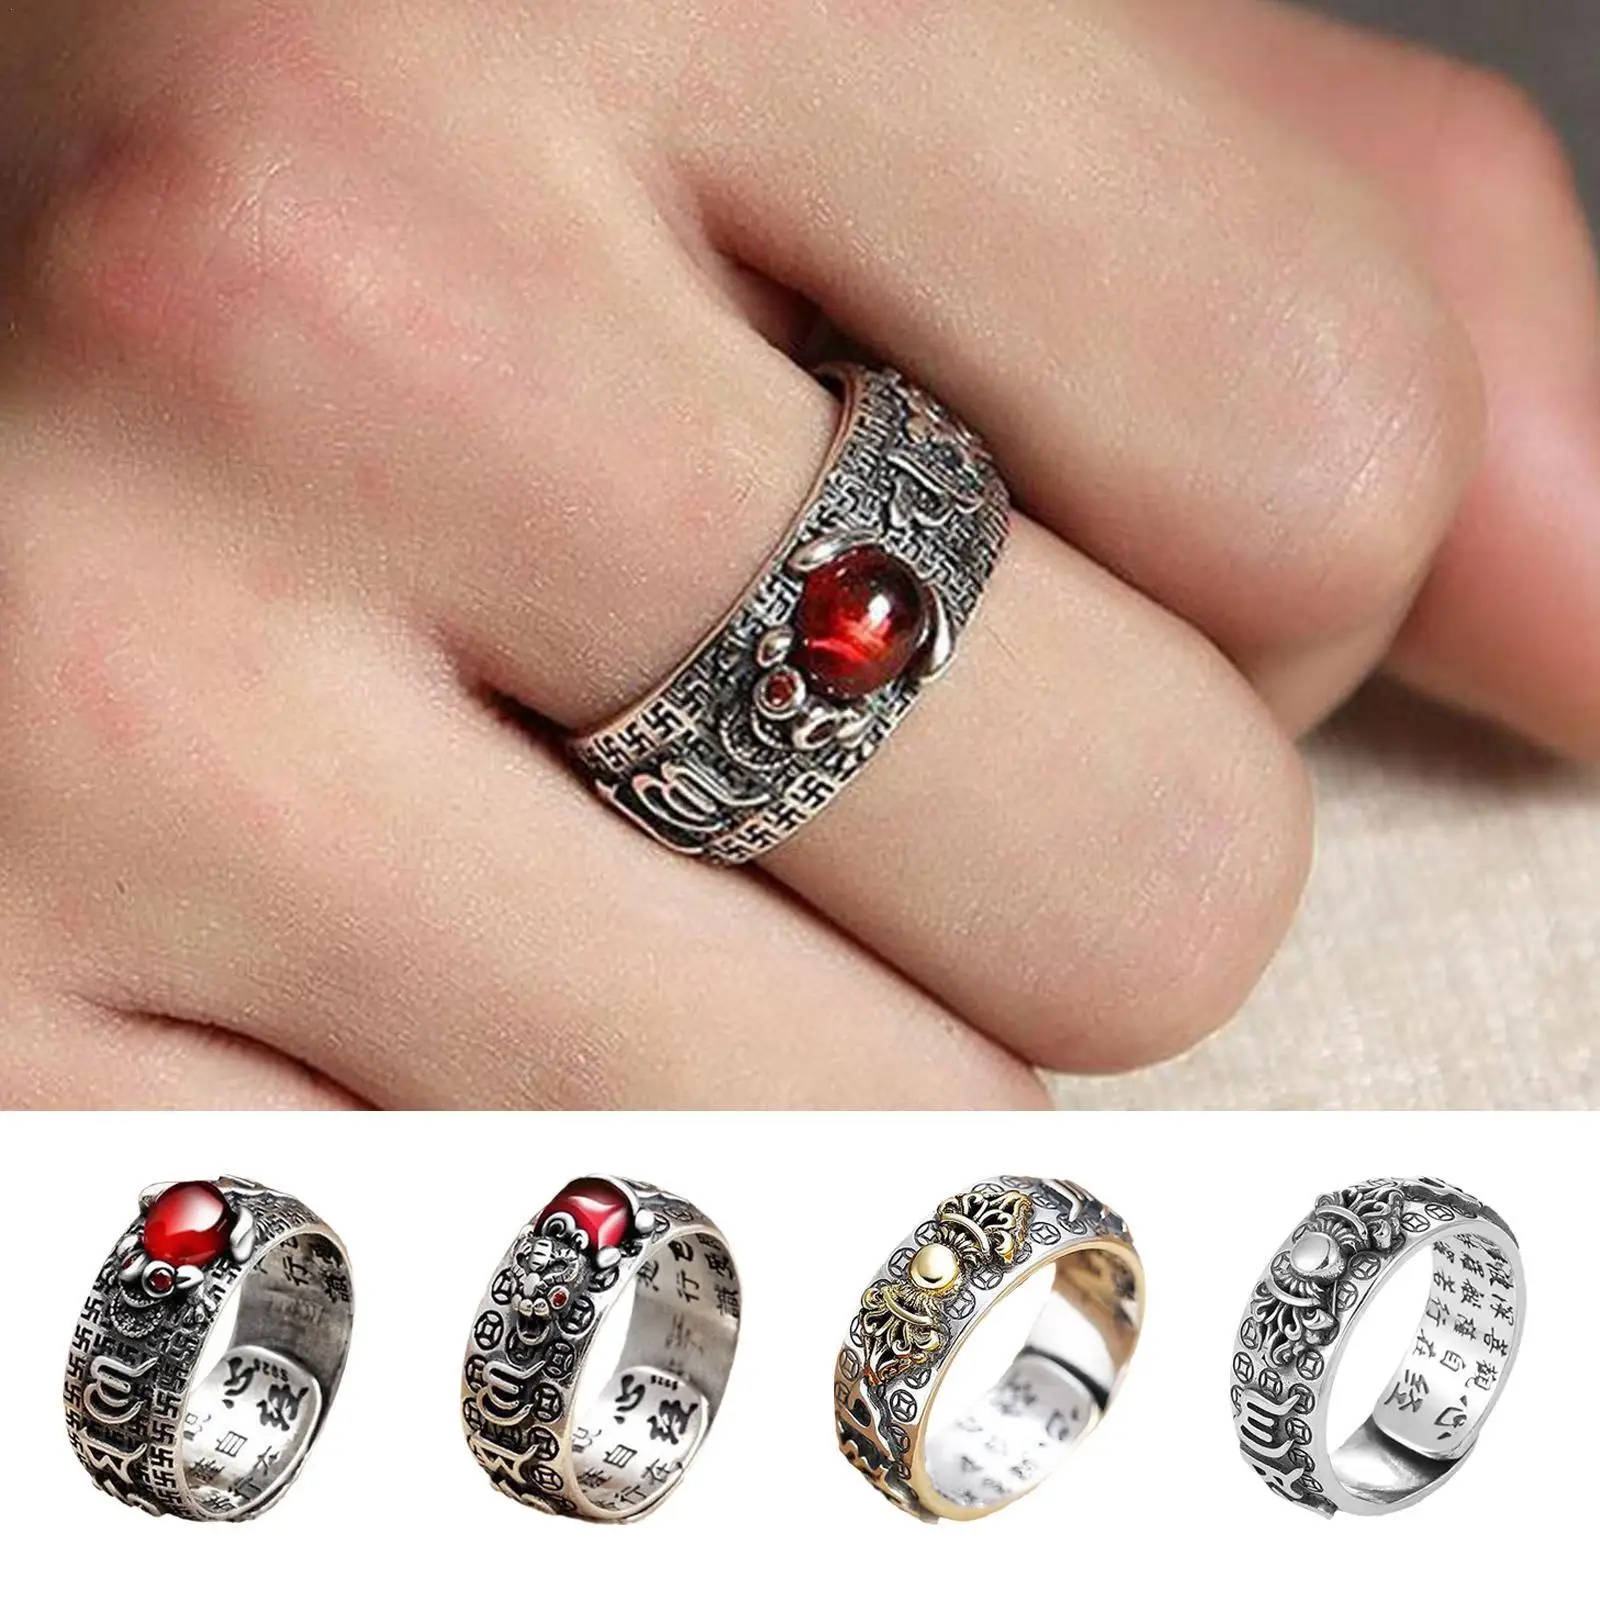 Vintage Original Feng Shui Ring Amulets For Good Luck And Protection Wealth Men's Ring Golden Toad Jewelry Rings For Men Women